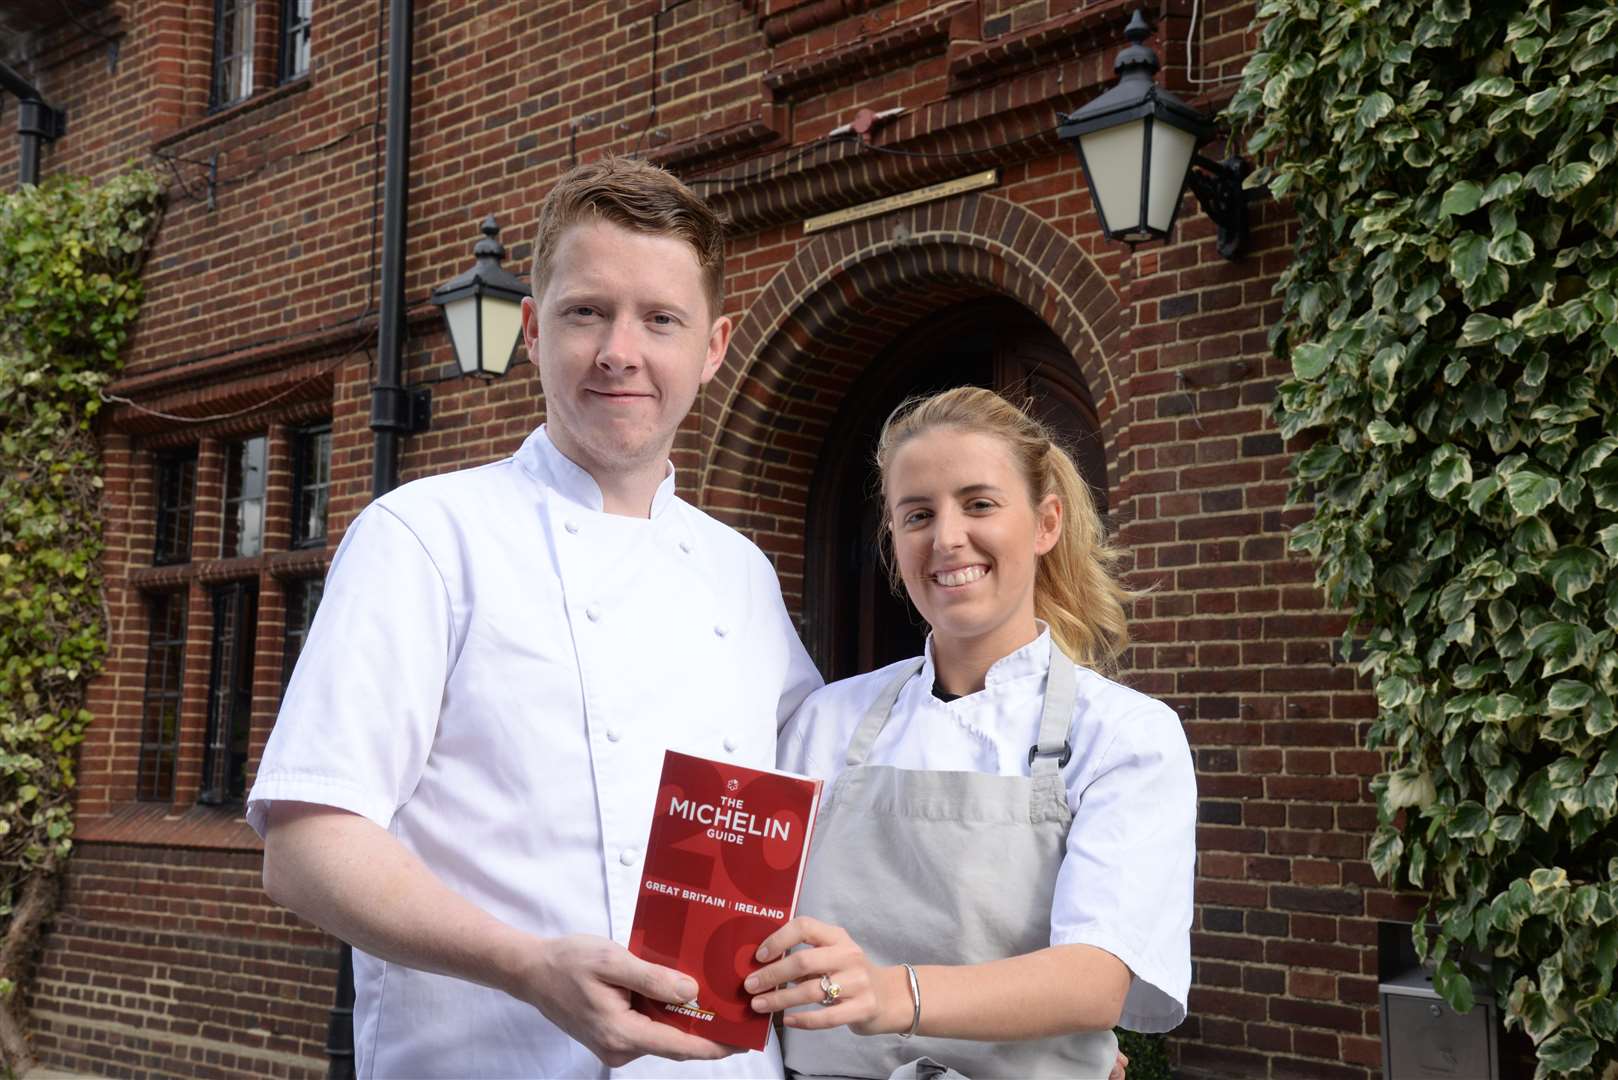 Dan and Natasha Smith celebrated being awarded a Michelin star in 2018